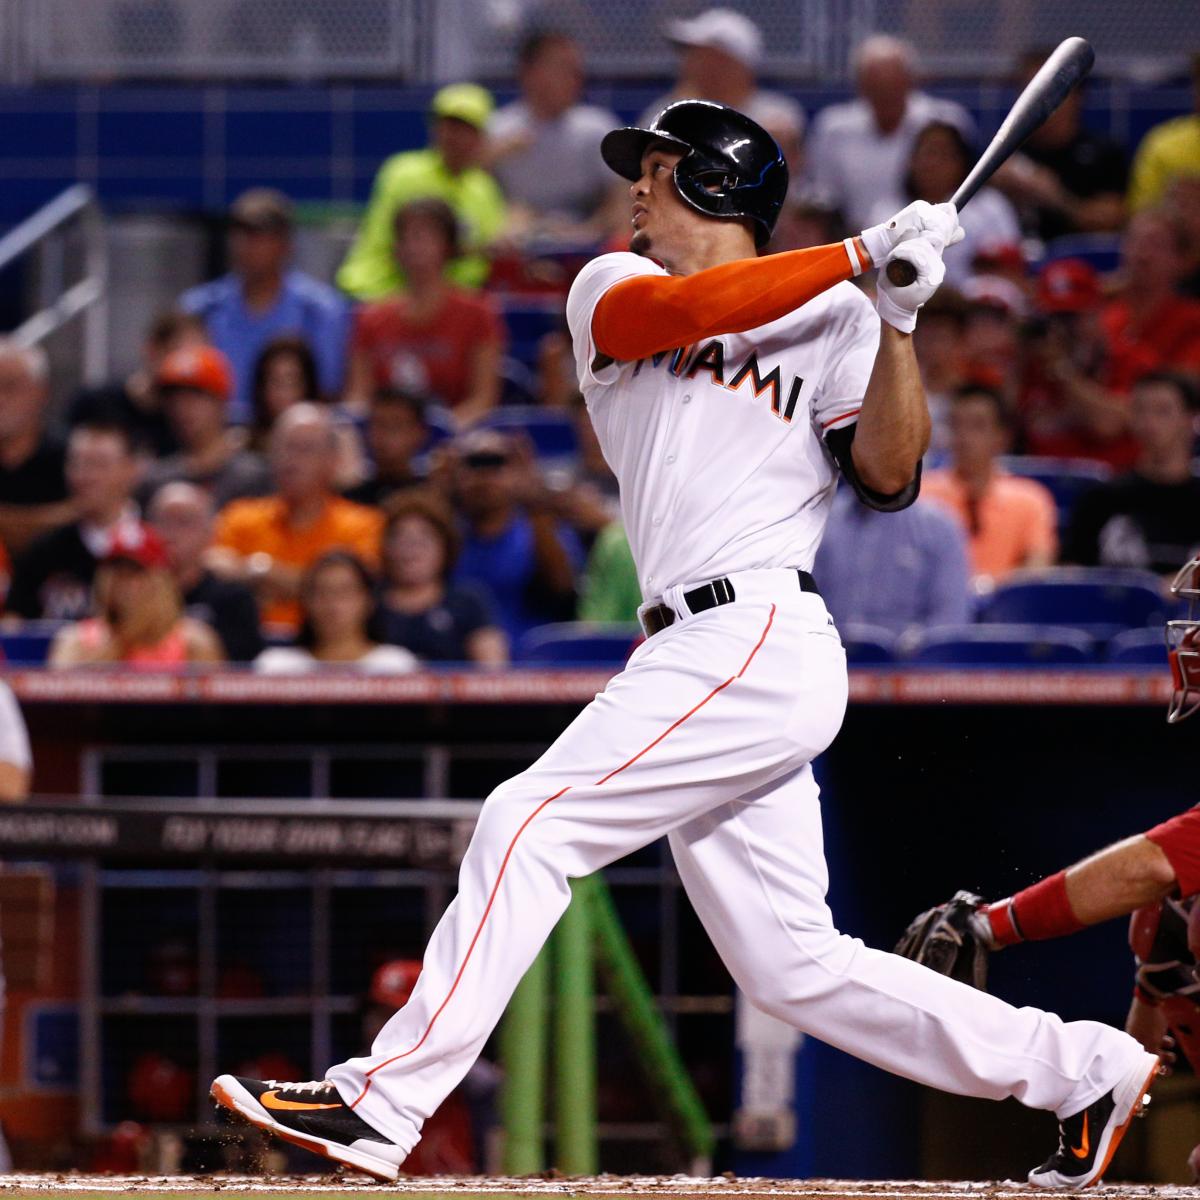 MLB notes: Marlins' Giancarlo Stanton reinstated from disabled